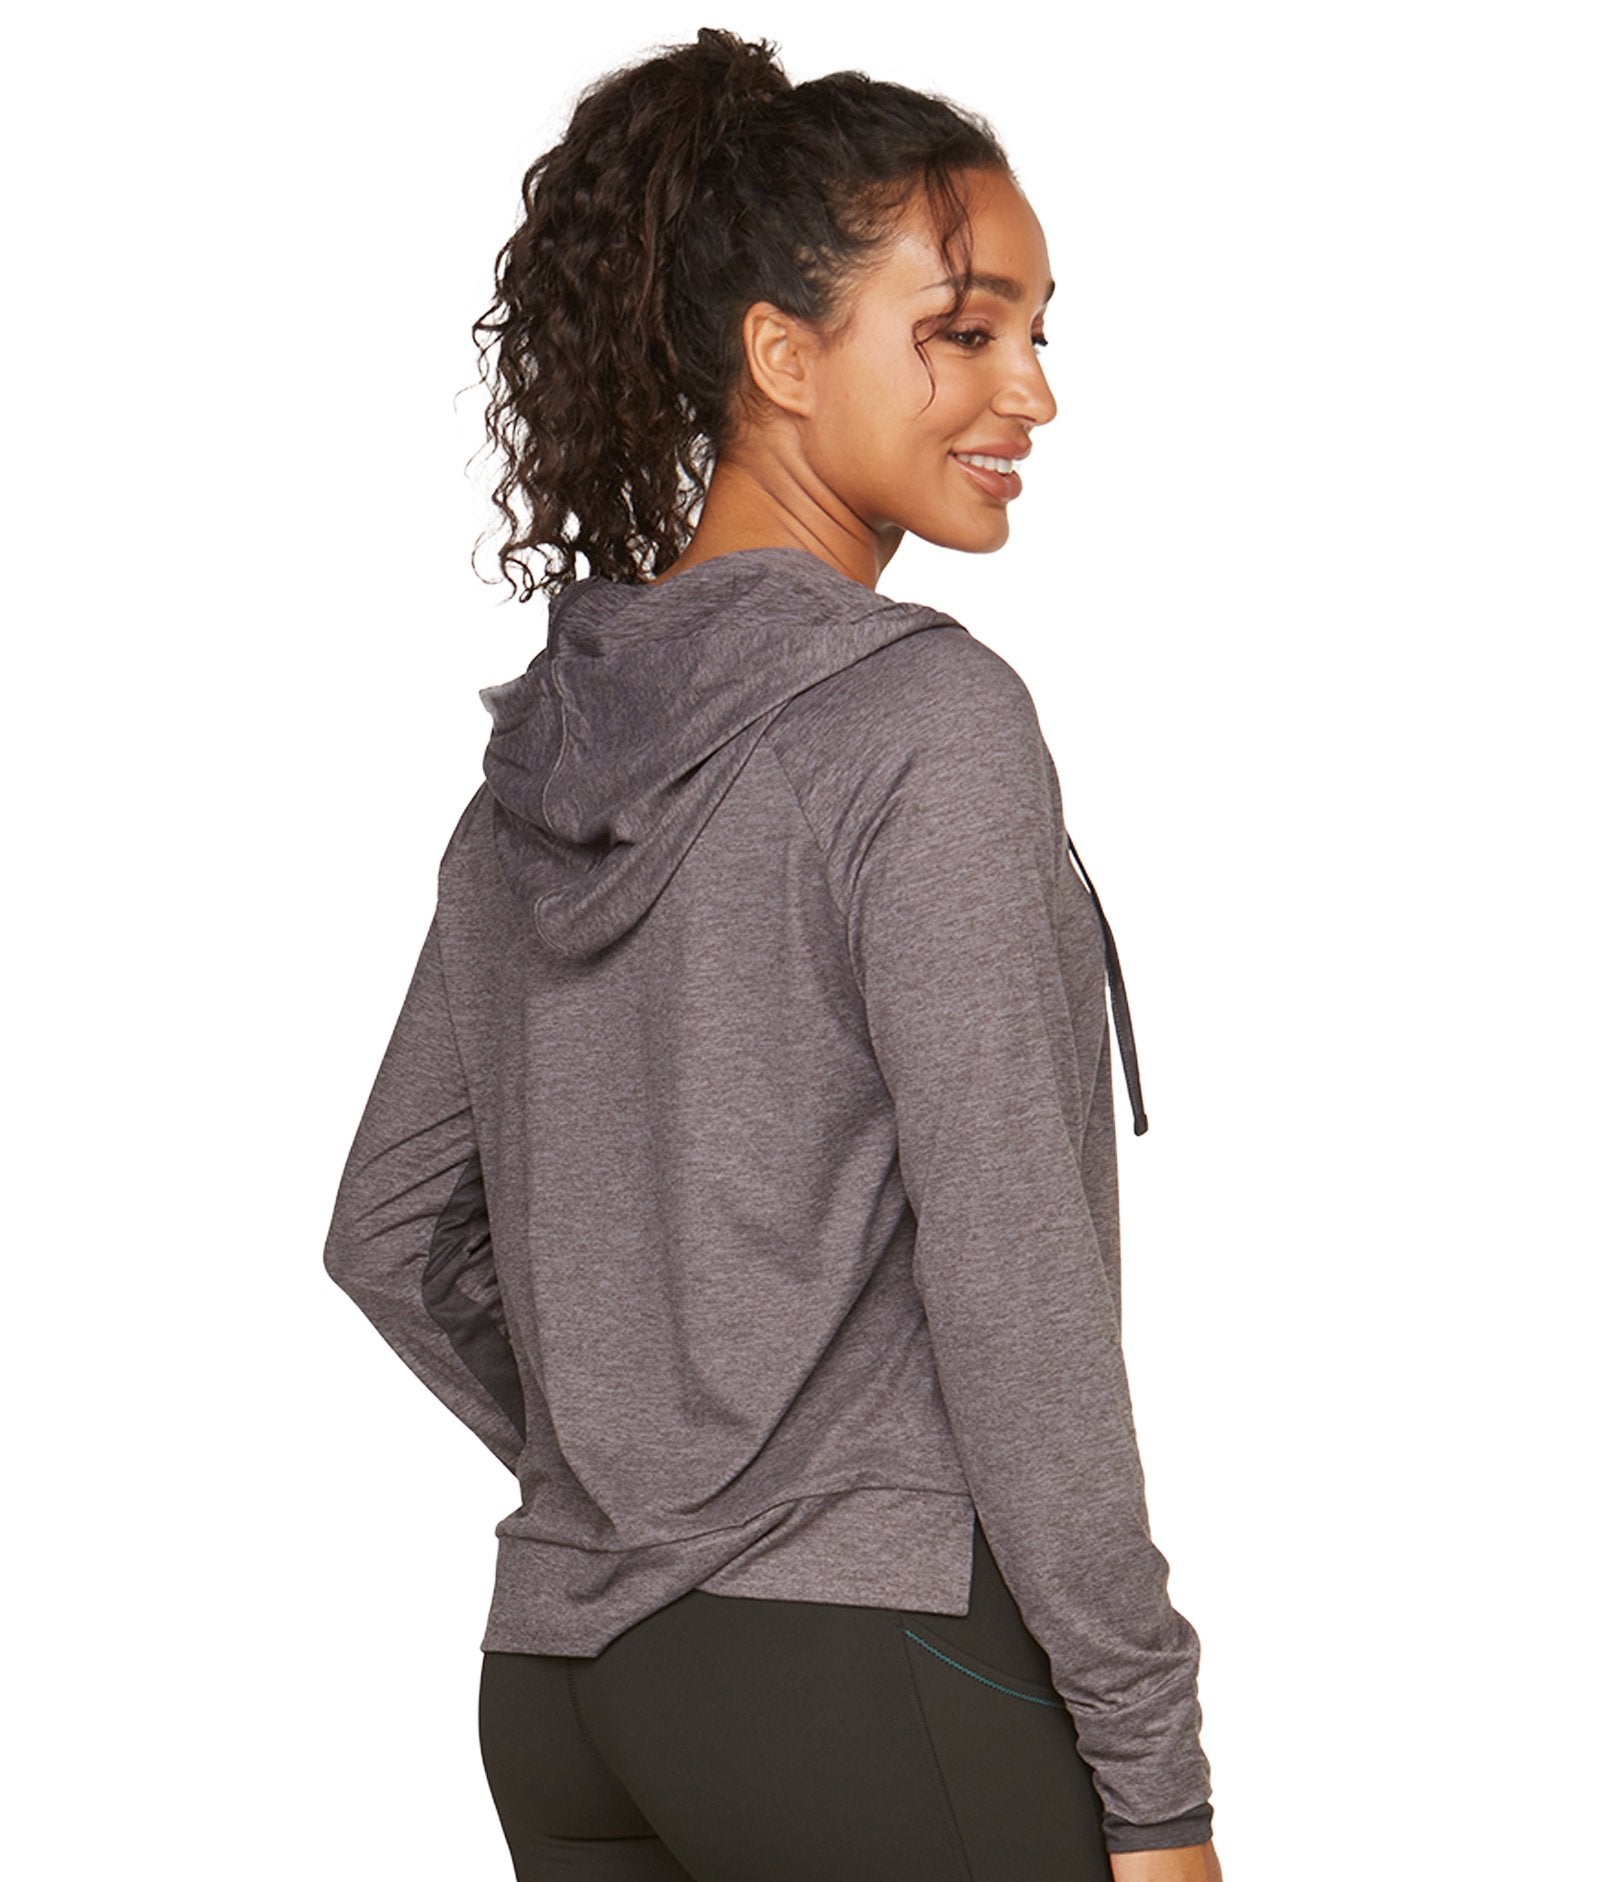 Women's Heather Charcoal Aflame Recycled Quarter Zip Hoodie